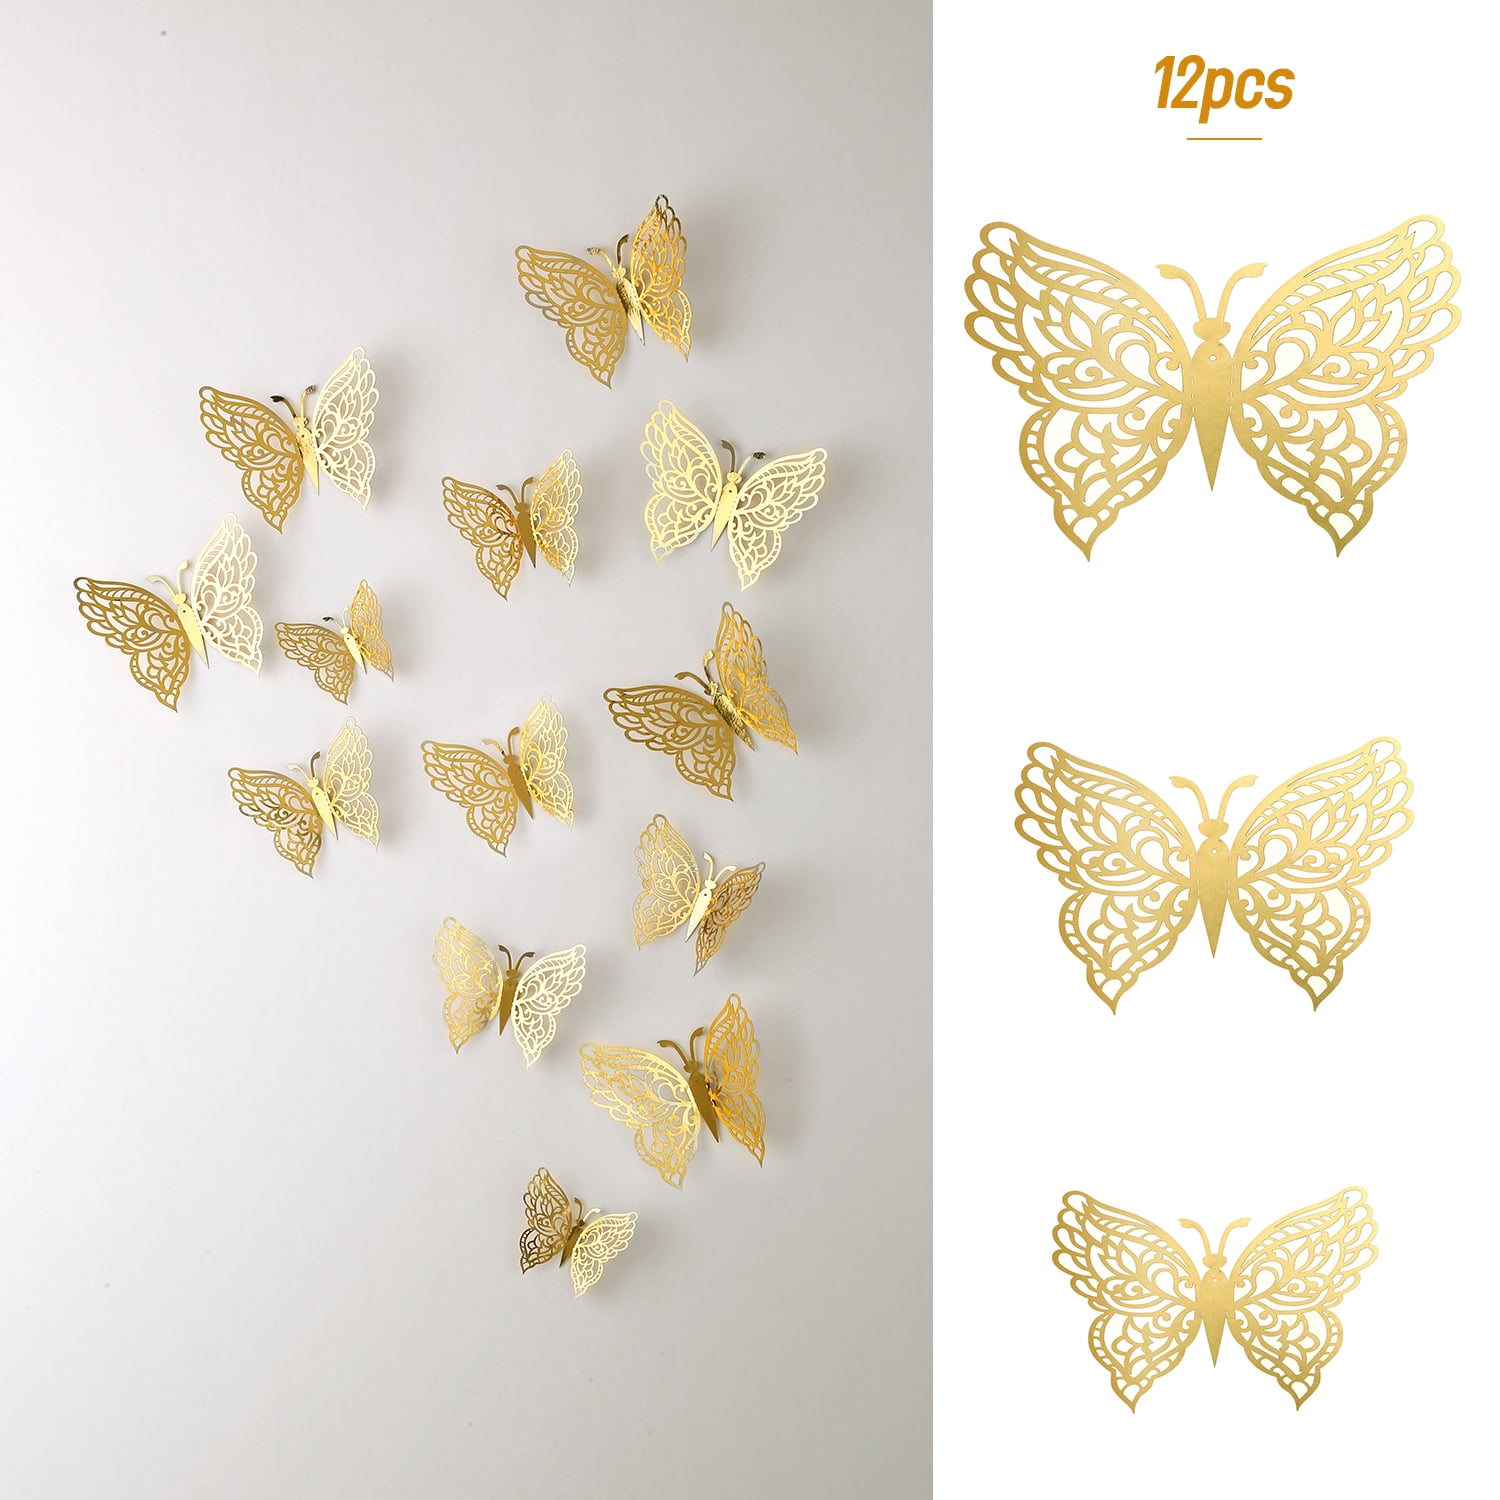 Wedding Decor/ DIY Home Decoration 12pcs New 3D Butterfly Wall Sticker Party 